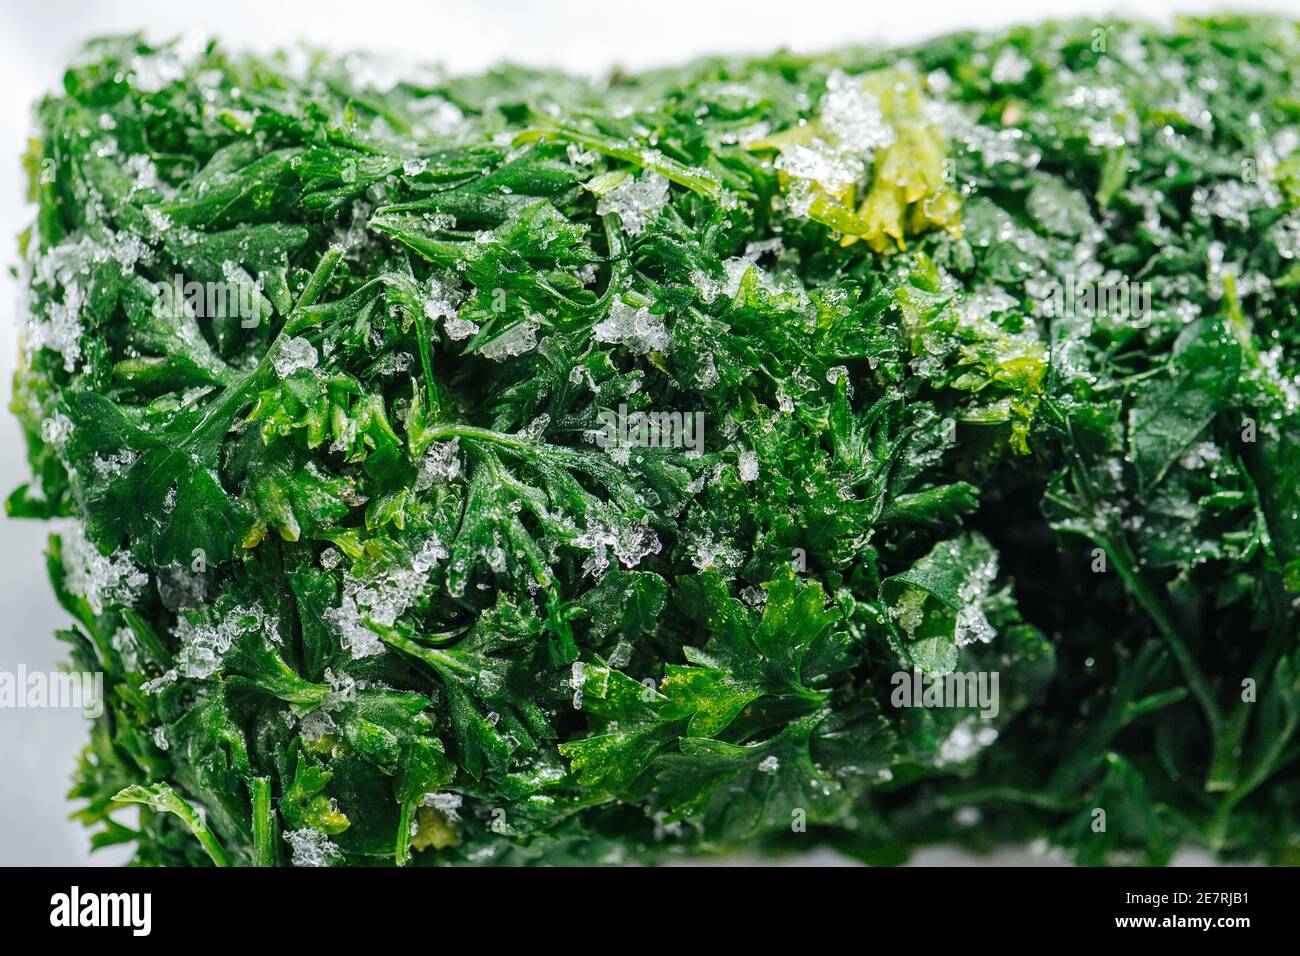 Close up image of frozen parsley green briquette covered with tiny ice crystals. Stock Photo